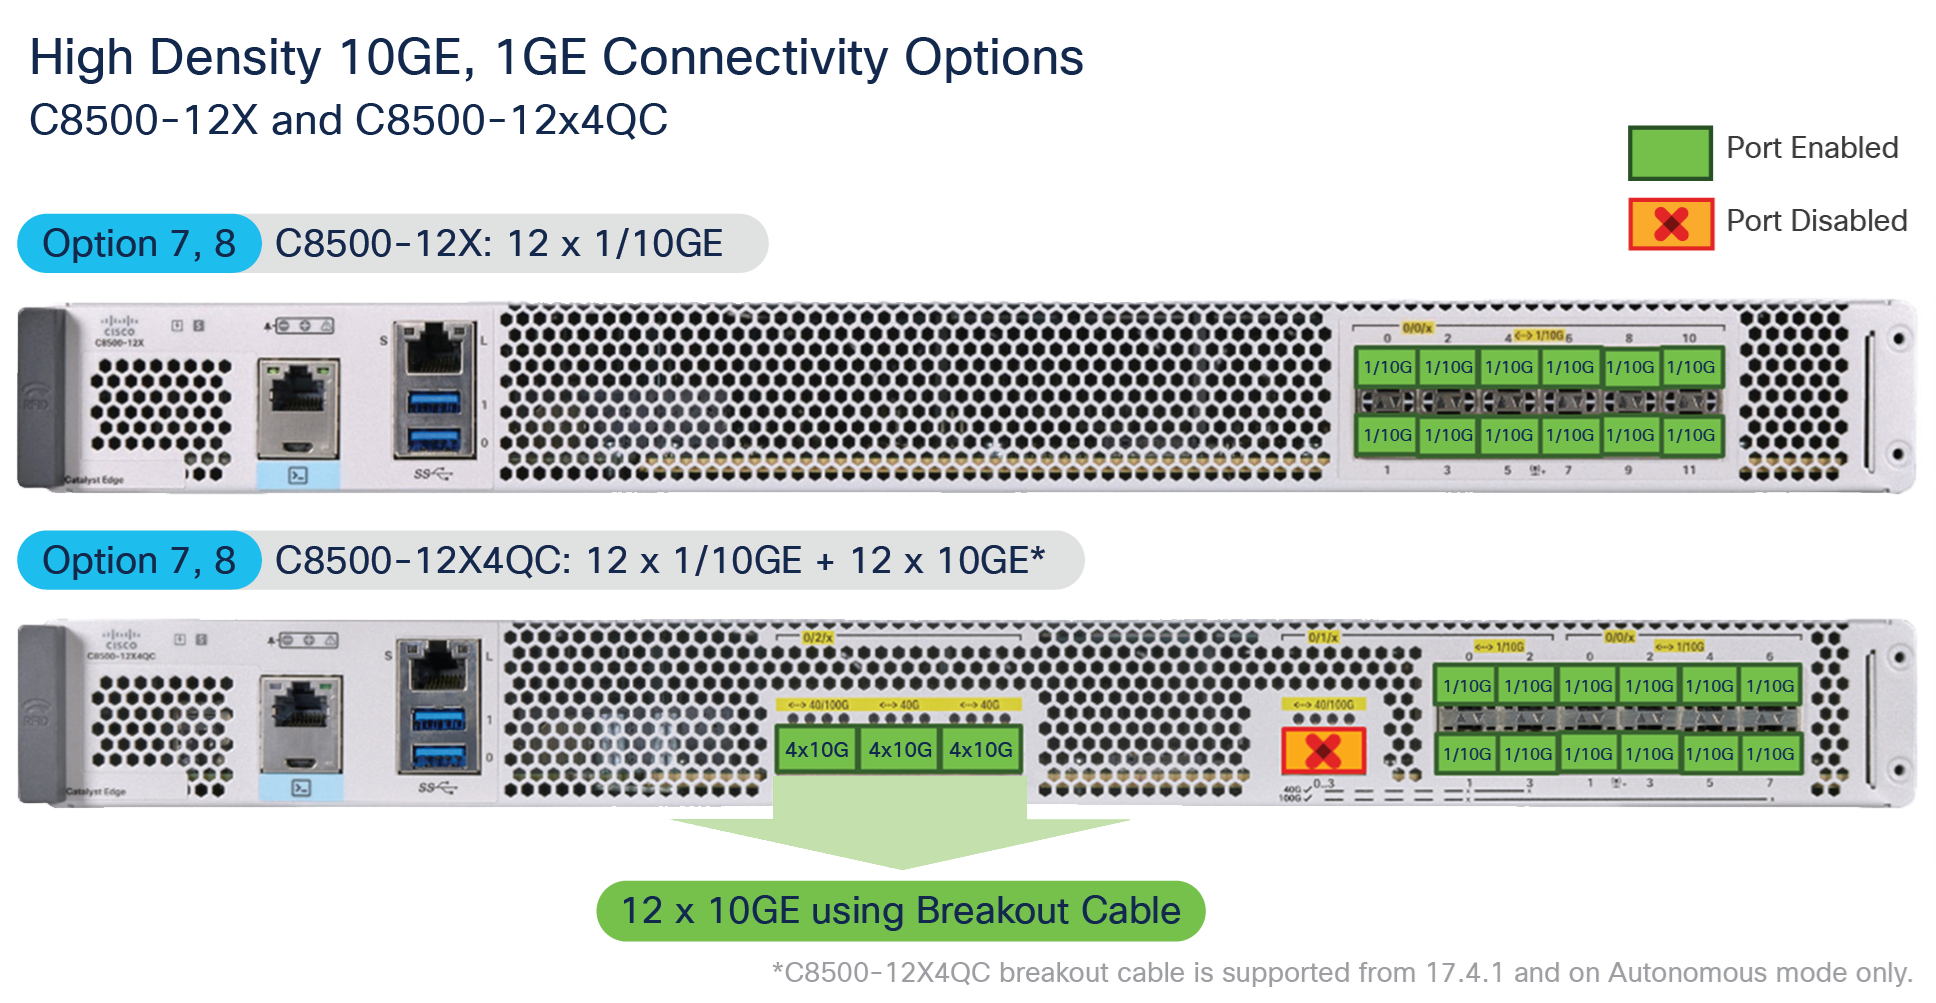 High-density 10 GE, 1 GE connectivity options